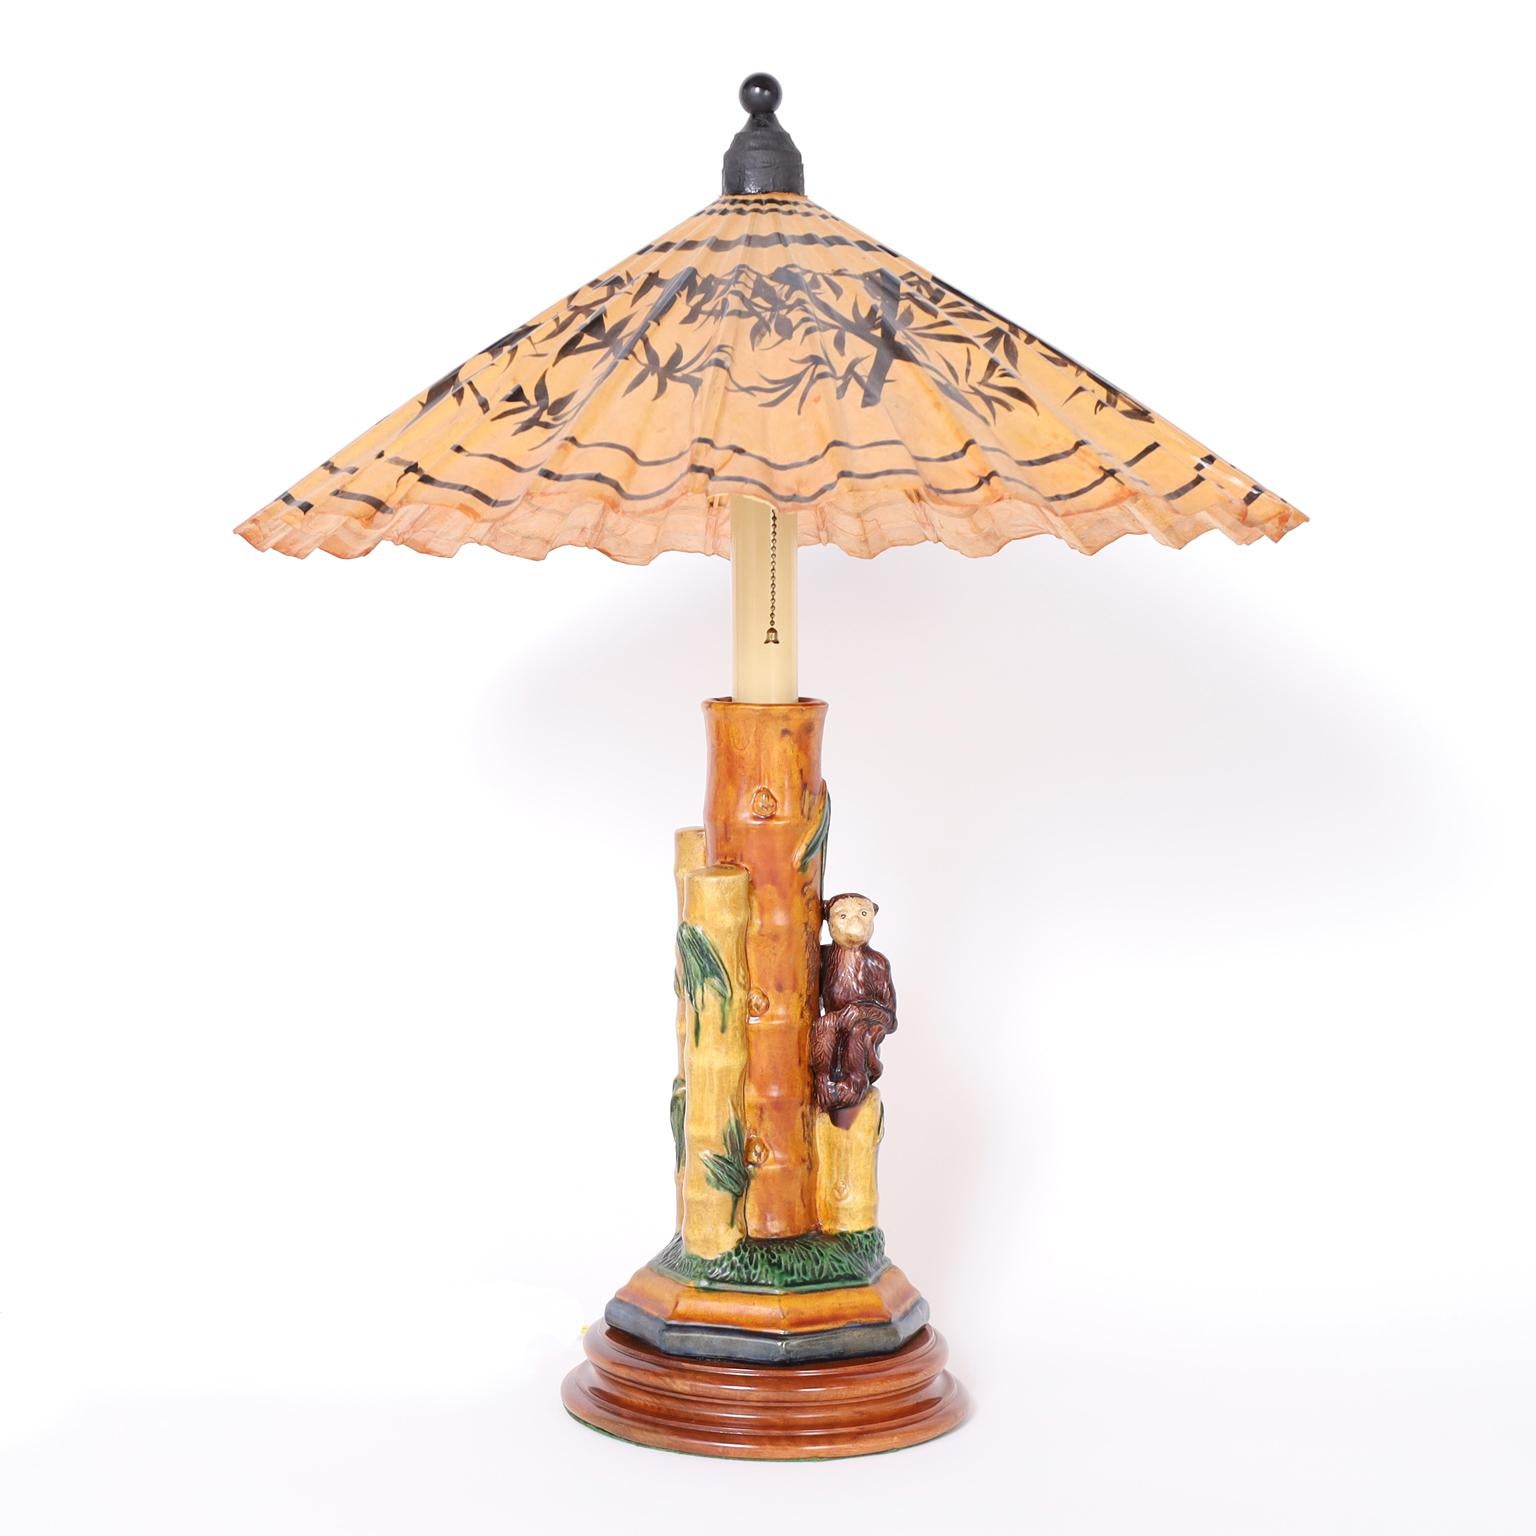 Pair of Porcelain Table Lamps with Monkeys and Umbrella Shades In Good Condition For Sale In Palm Beach, FL